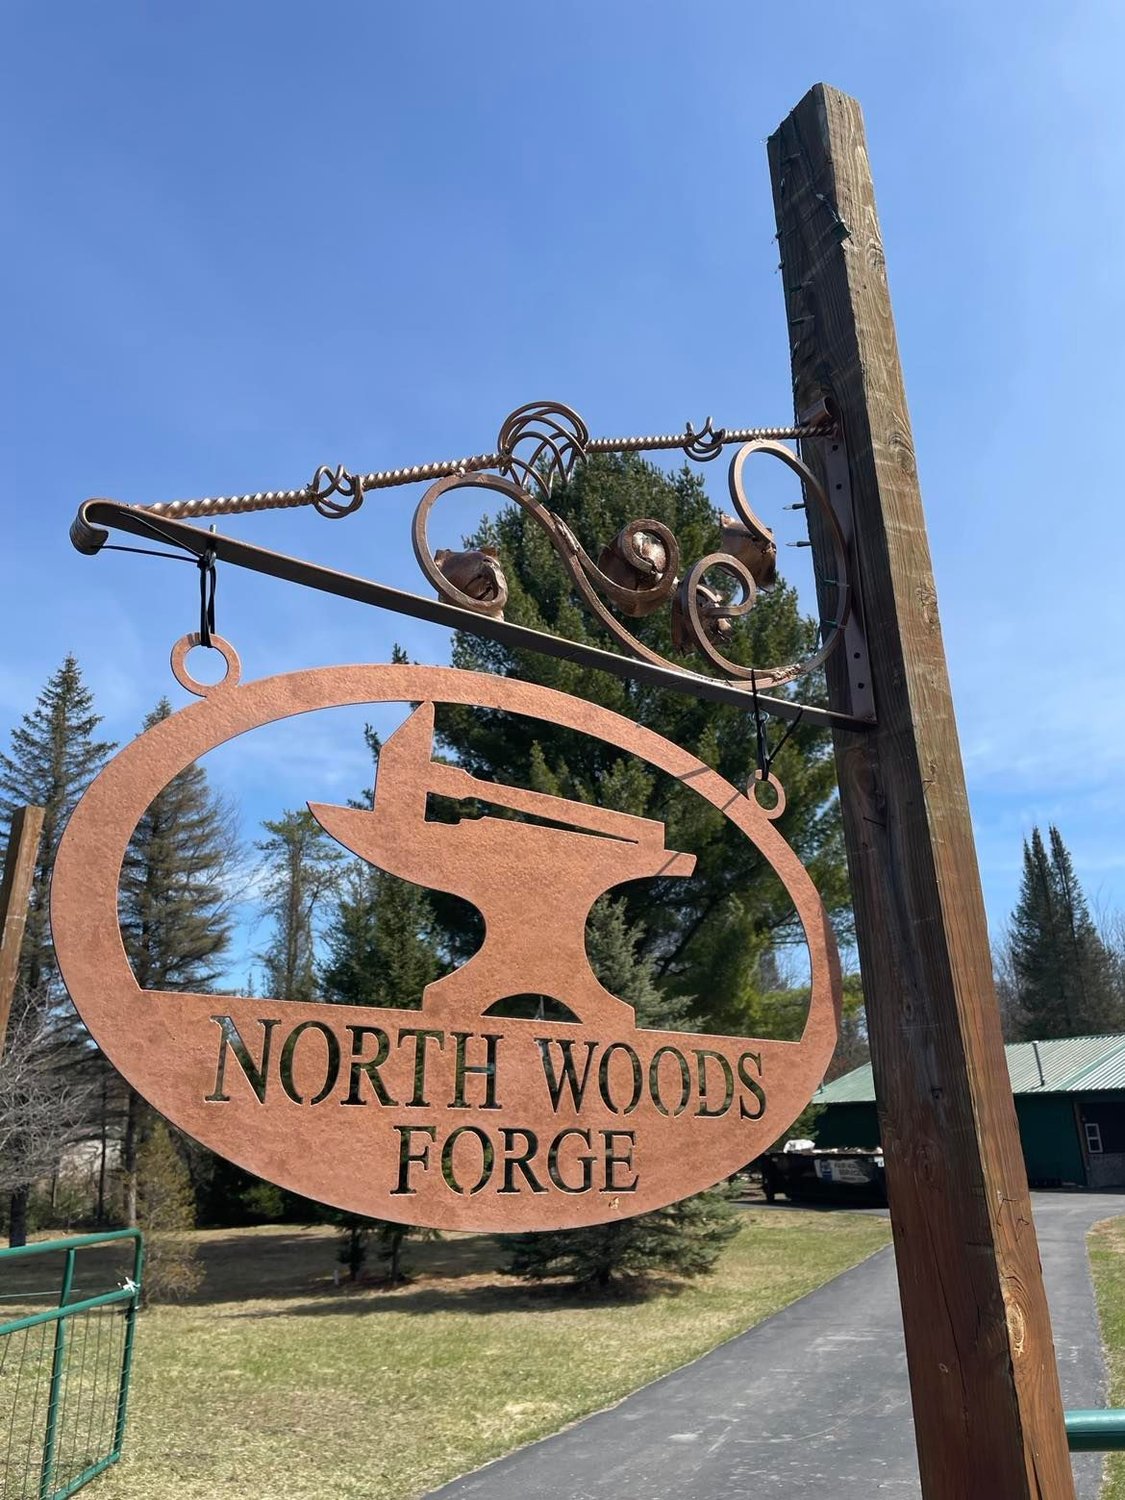 Made by owner David McConnell, this sign hangs in front of the new business North Woods Forge, north of Harrison.